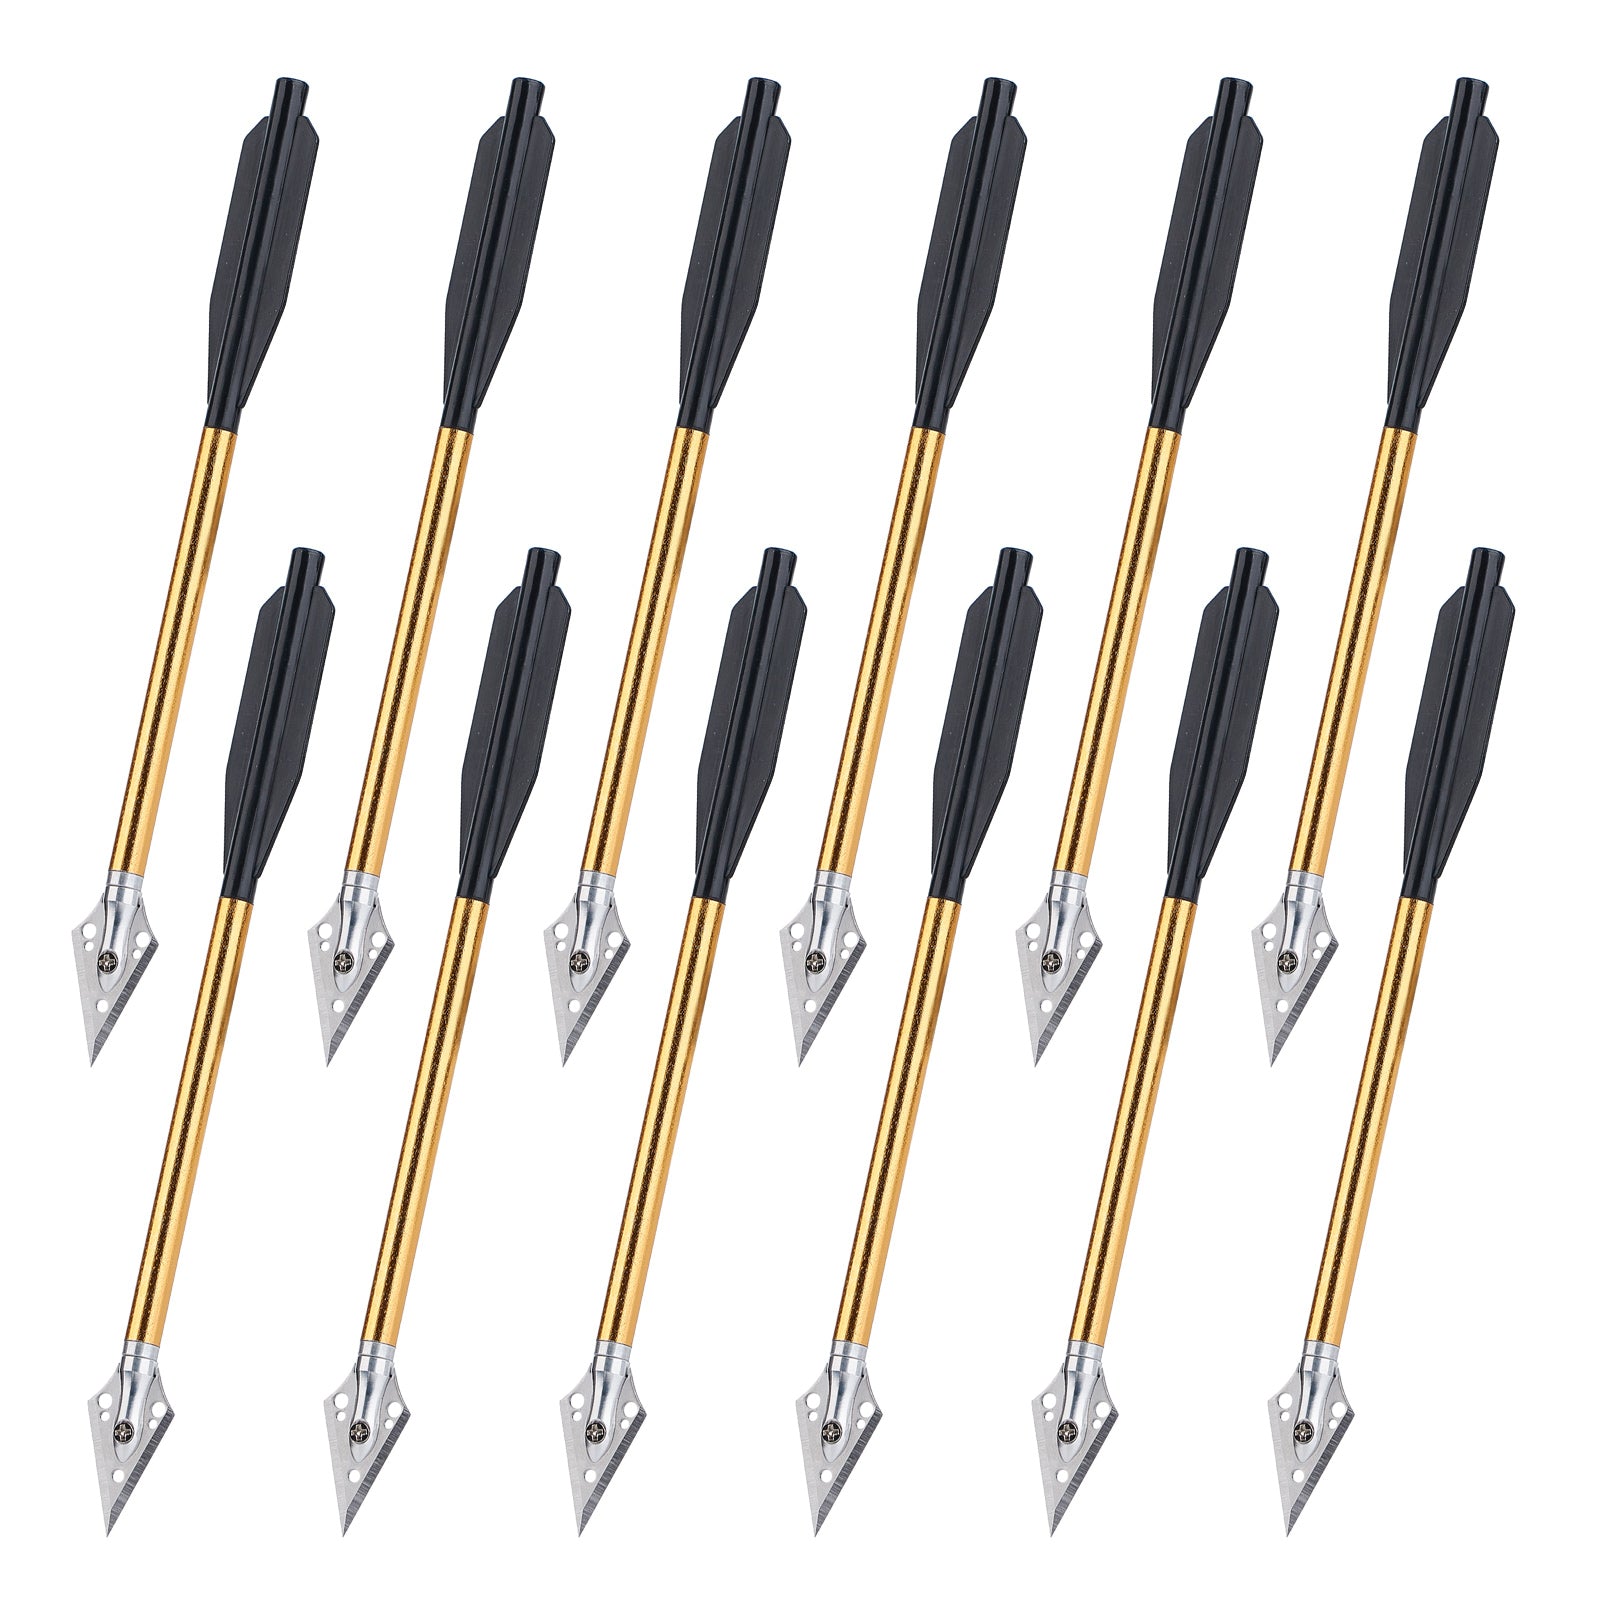 12x 6.5 Aluminum Crossbow Bolts Arrows Replaceable Steel Tips Broadhead 50-80lbs Pistol Archery Hunting Golden/Red/Black Shafts Black Vanes